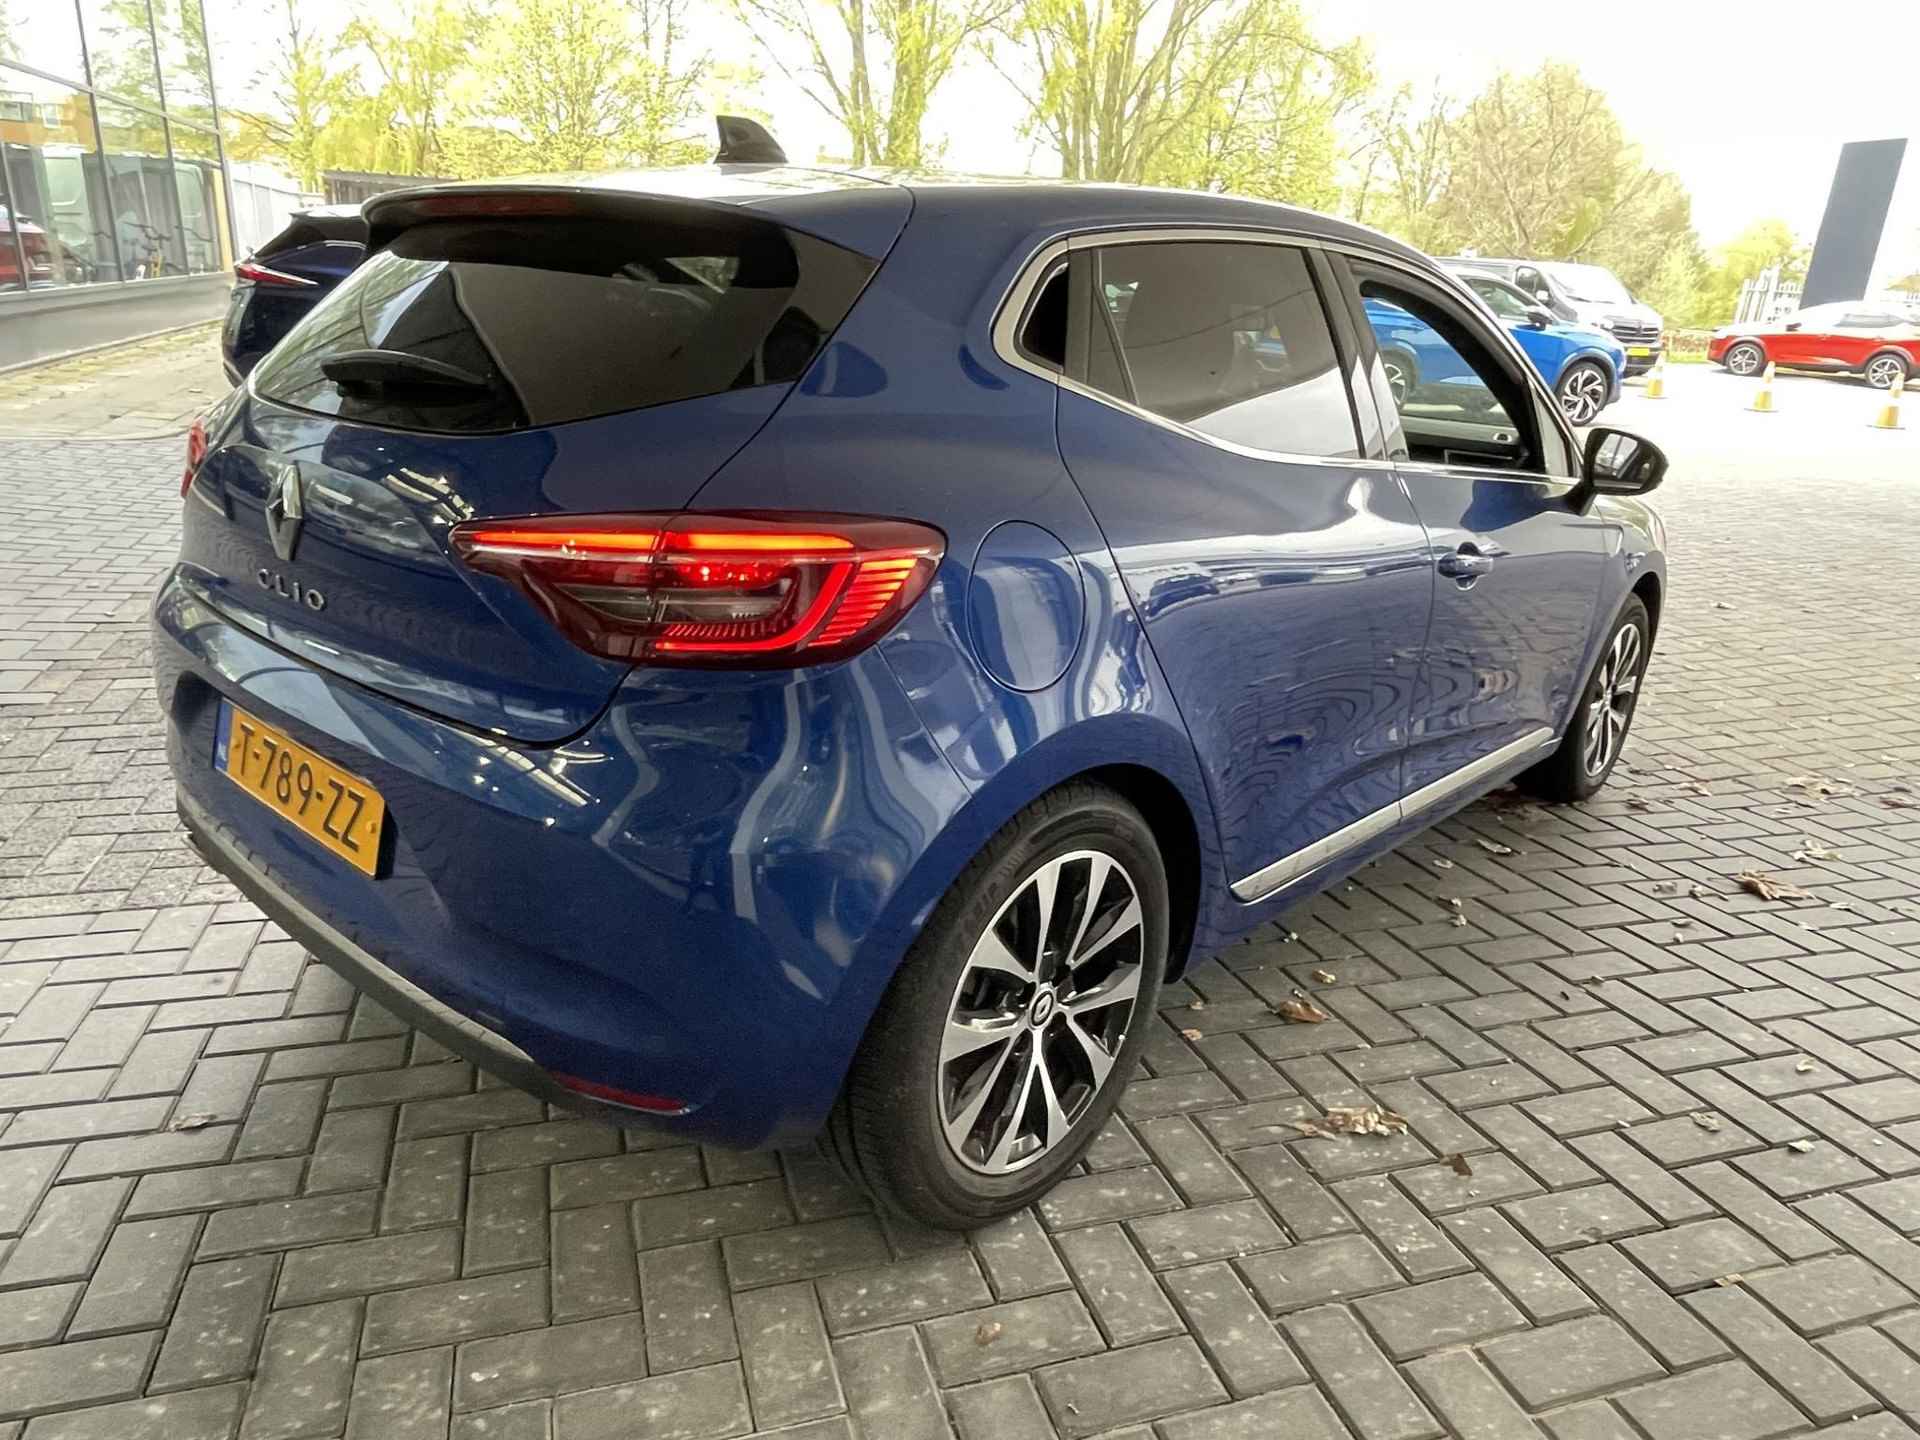 Renault Clio 1.0 TCe 90 Techno  / Cruise / Clima / Full LED / Navigatie / Camera / PDC  / Apple Carplay of Android Auto - 8/27